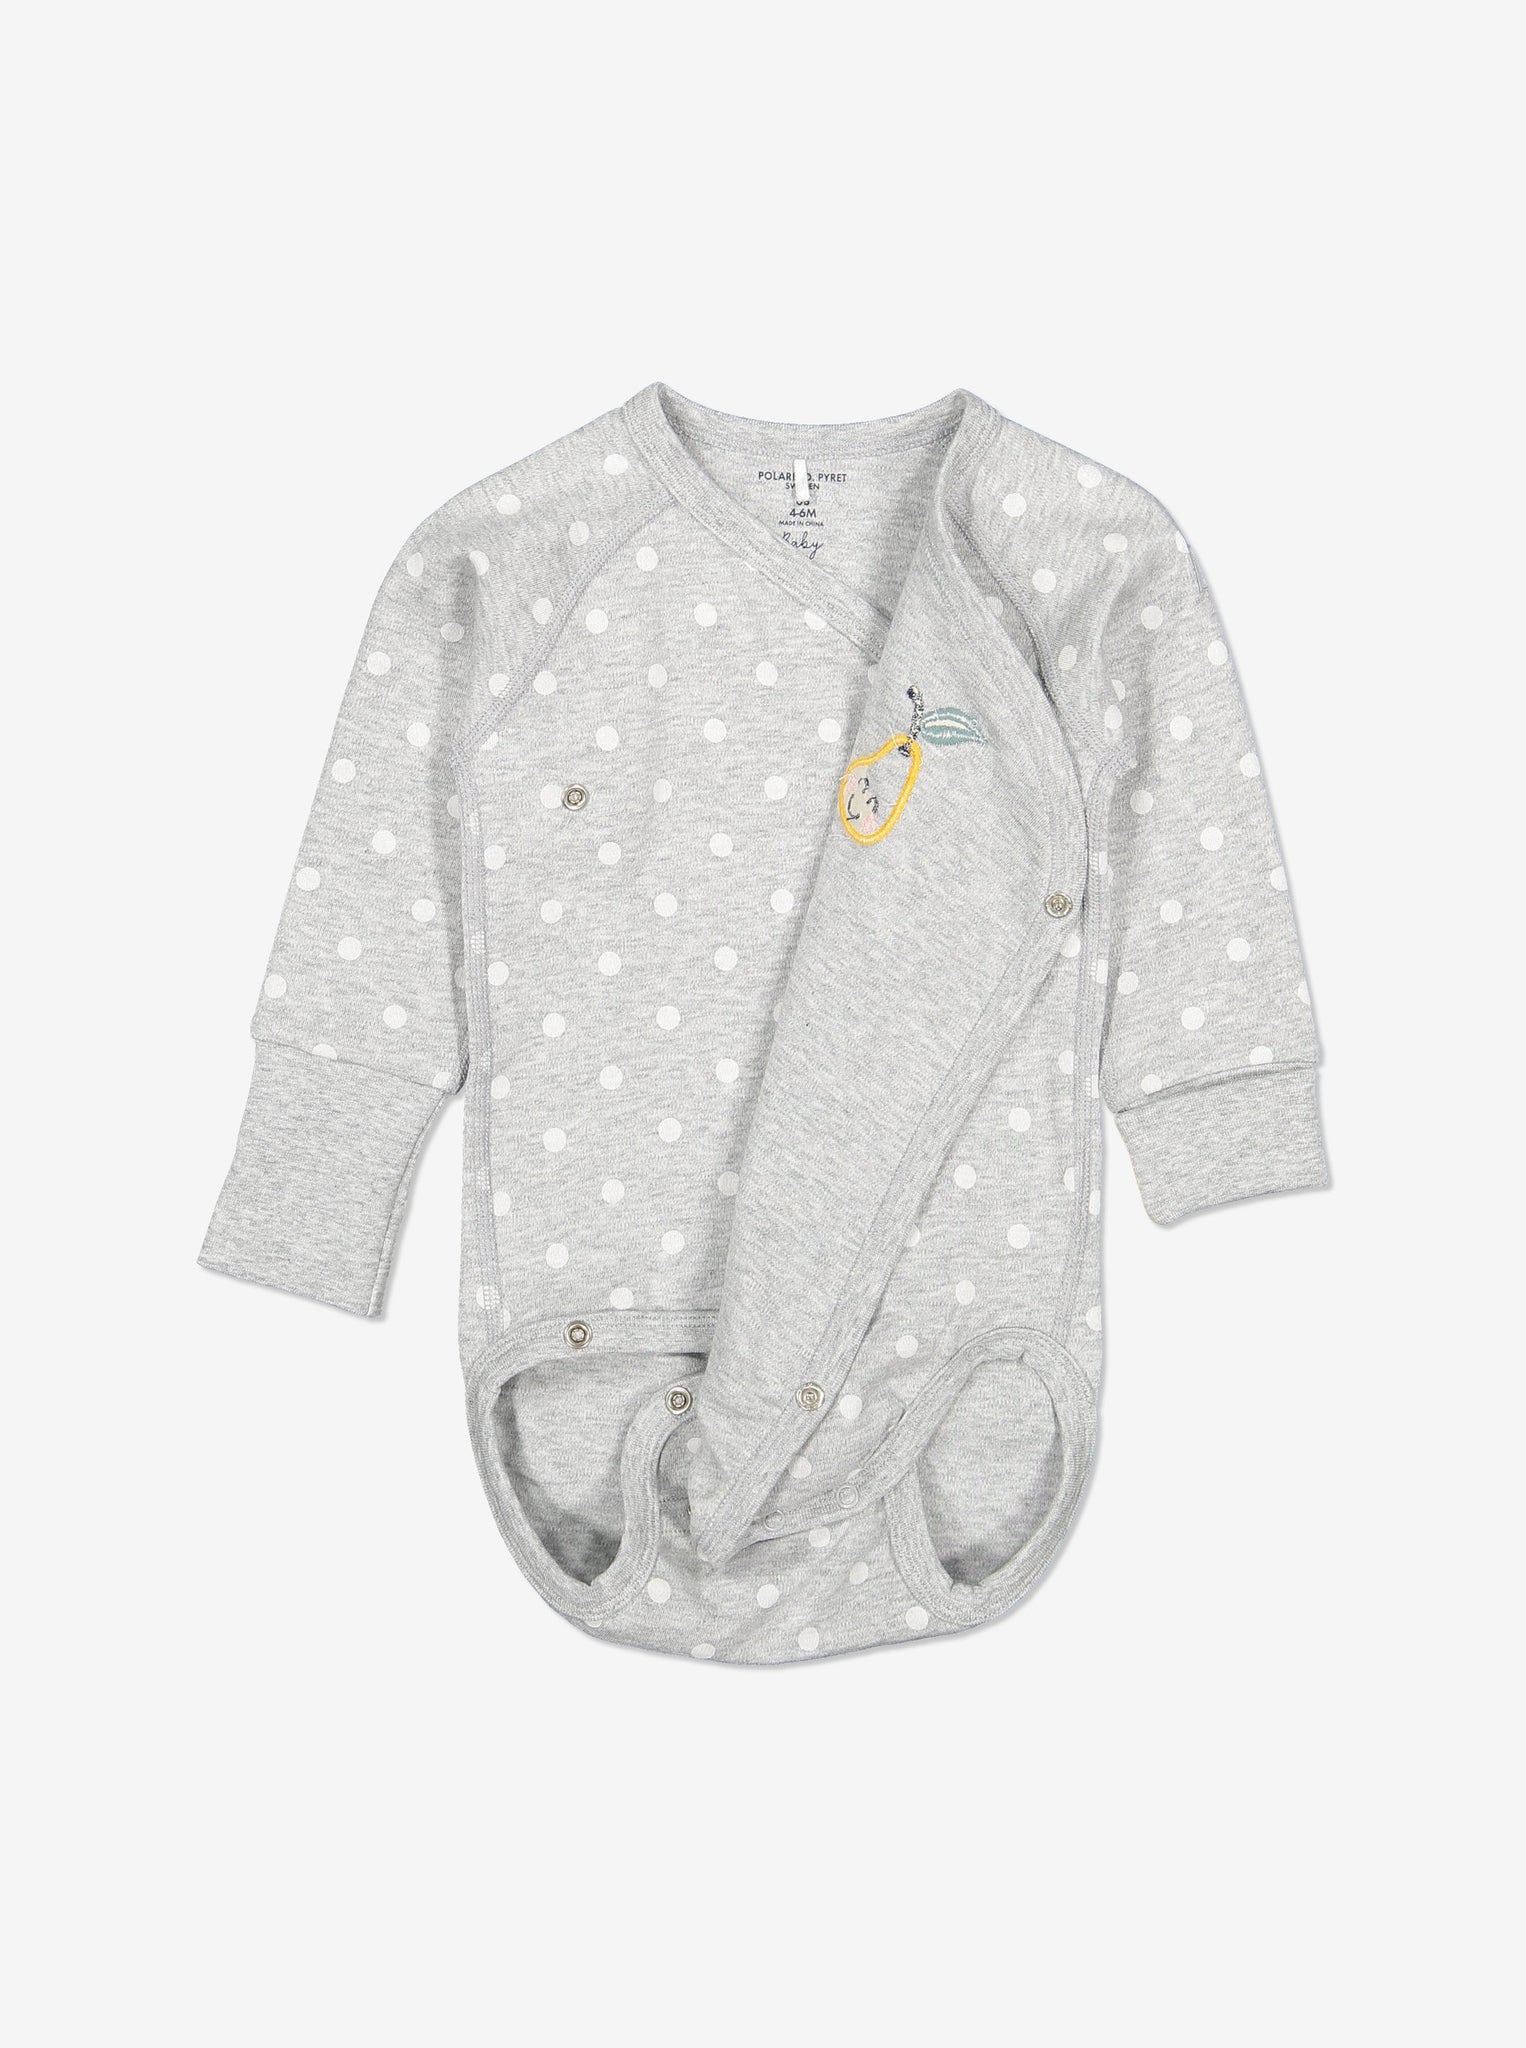 Embroidered Pear Wrapround Baby Bodysuit-Unisex-0-6m-Grey